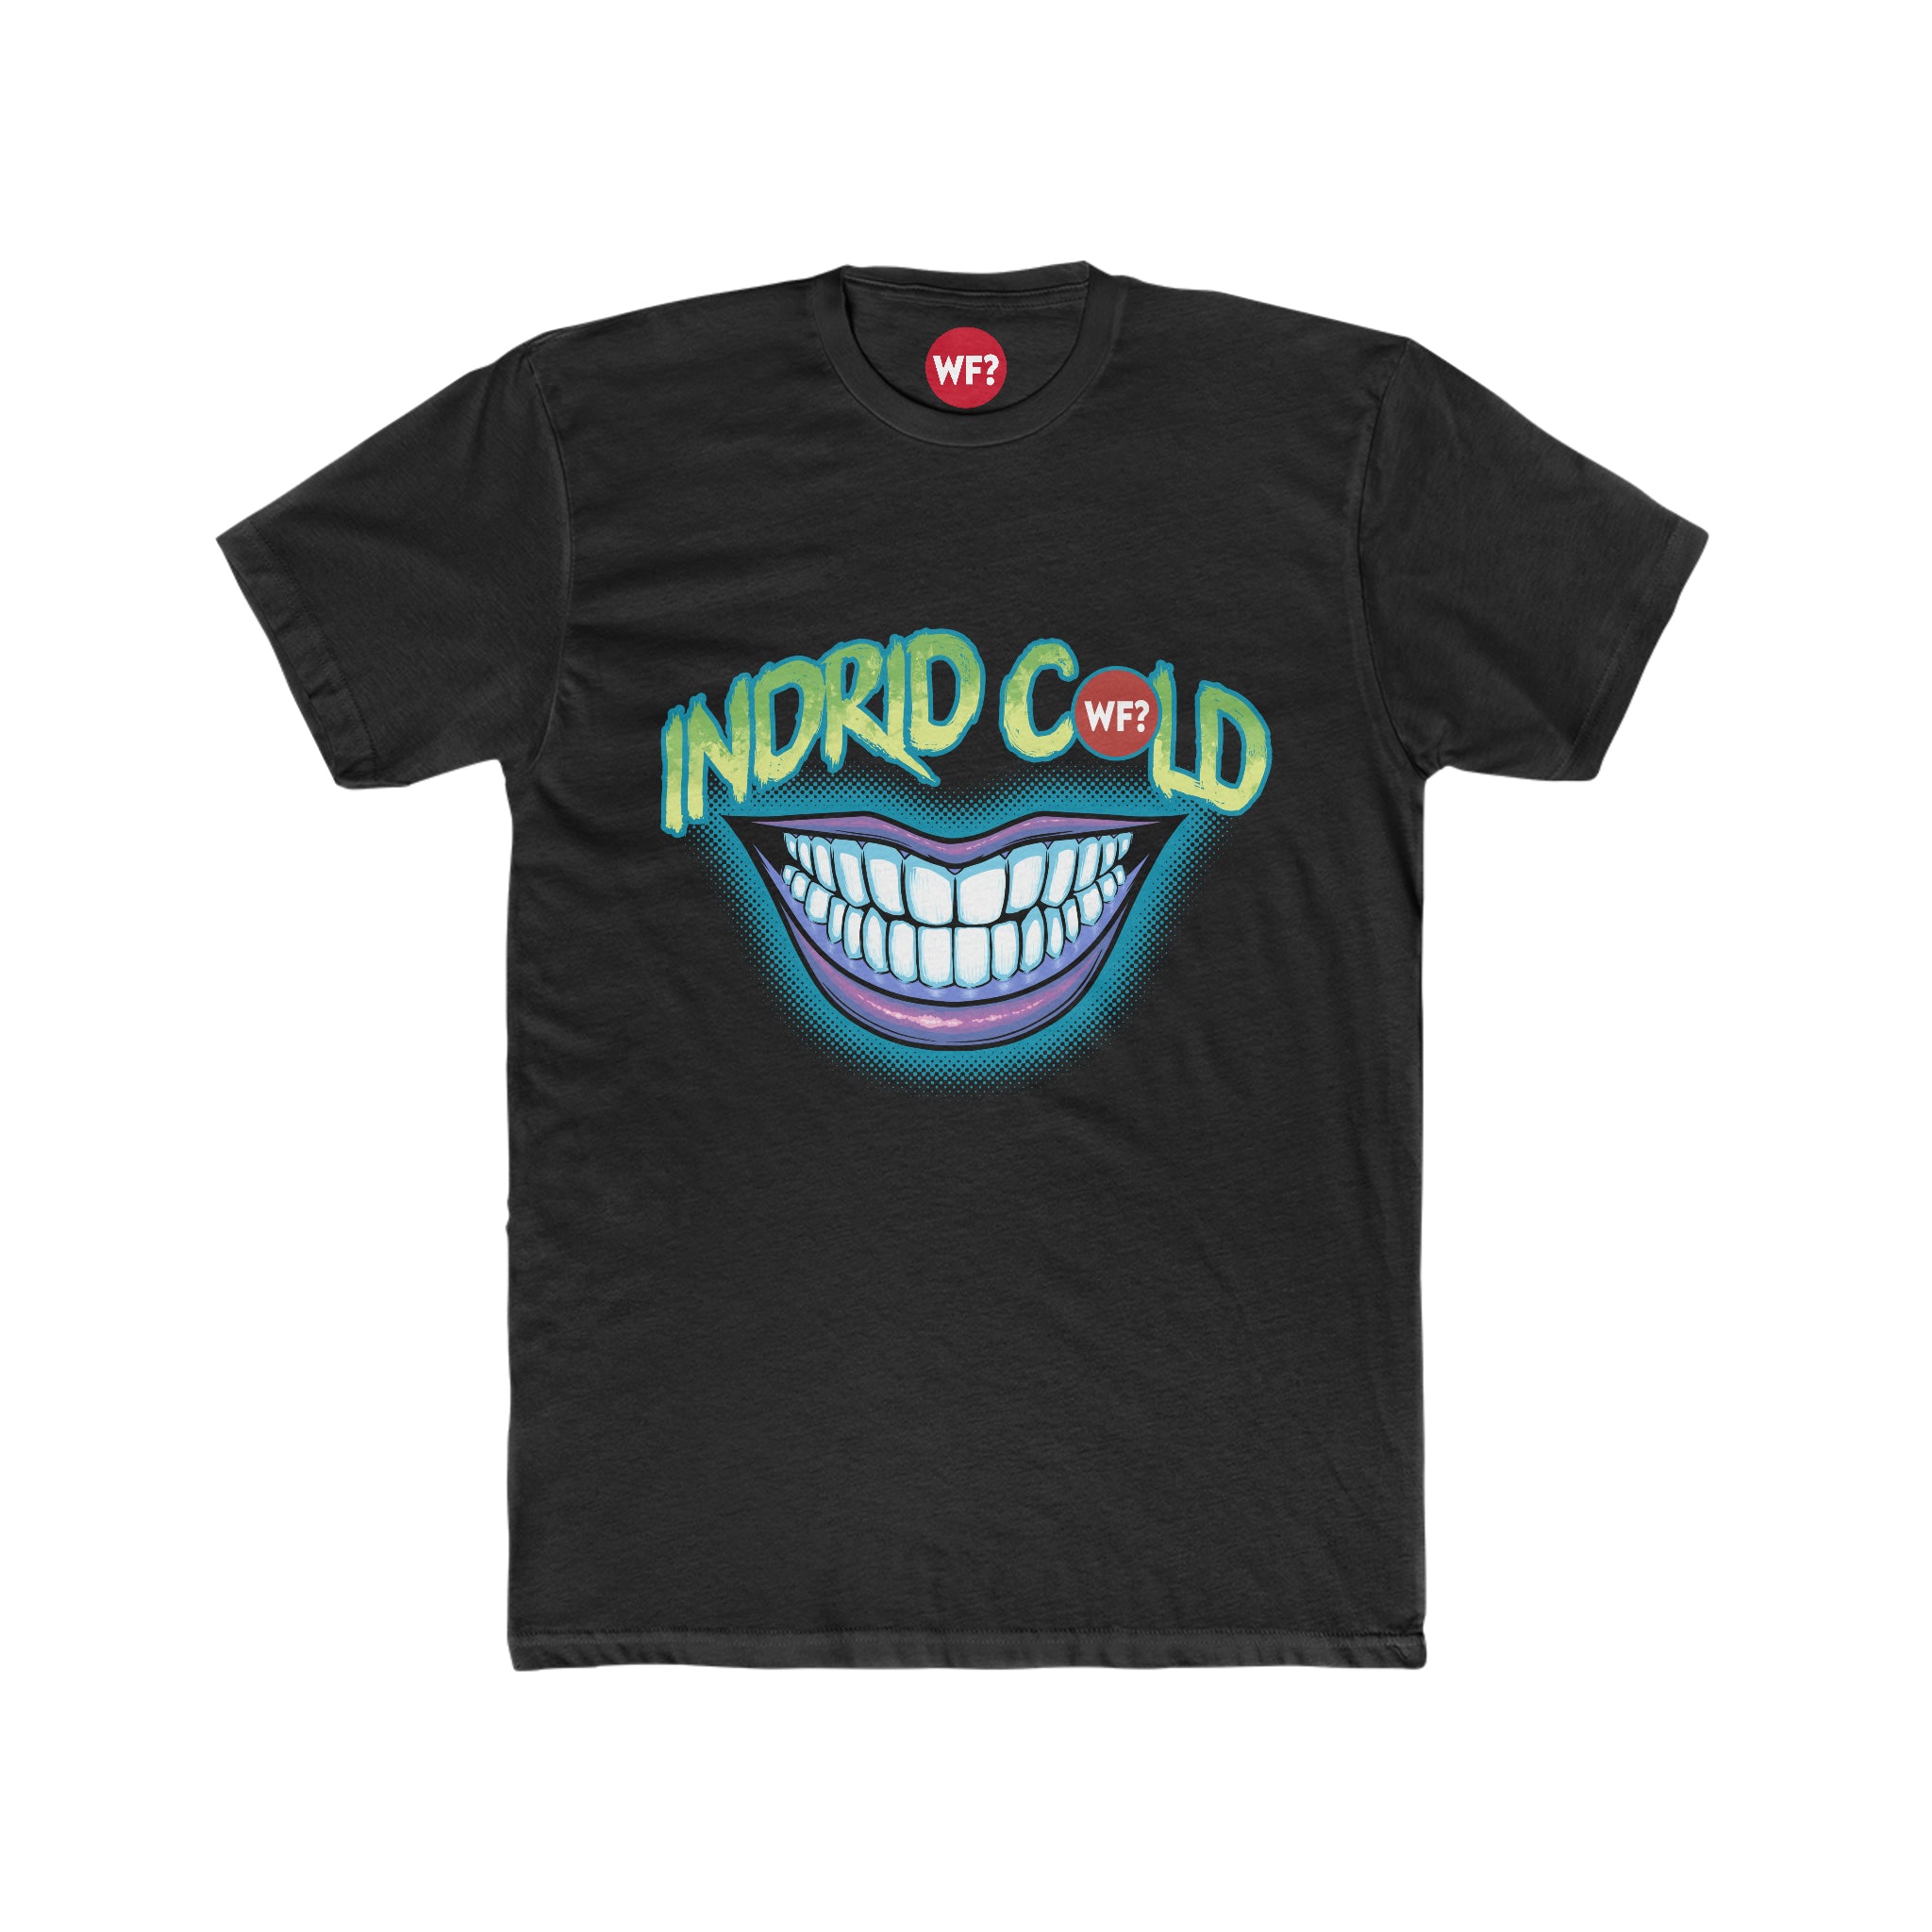 Buy solid-black Indrid Cold Limited T-Shirt